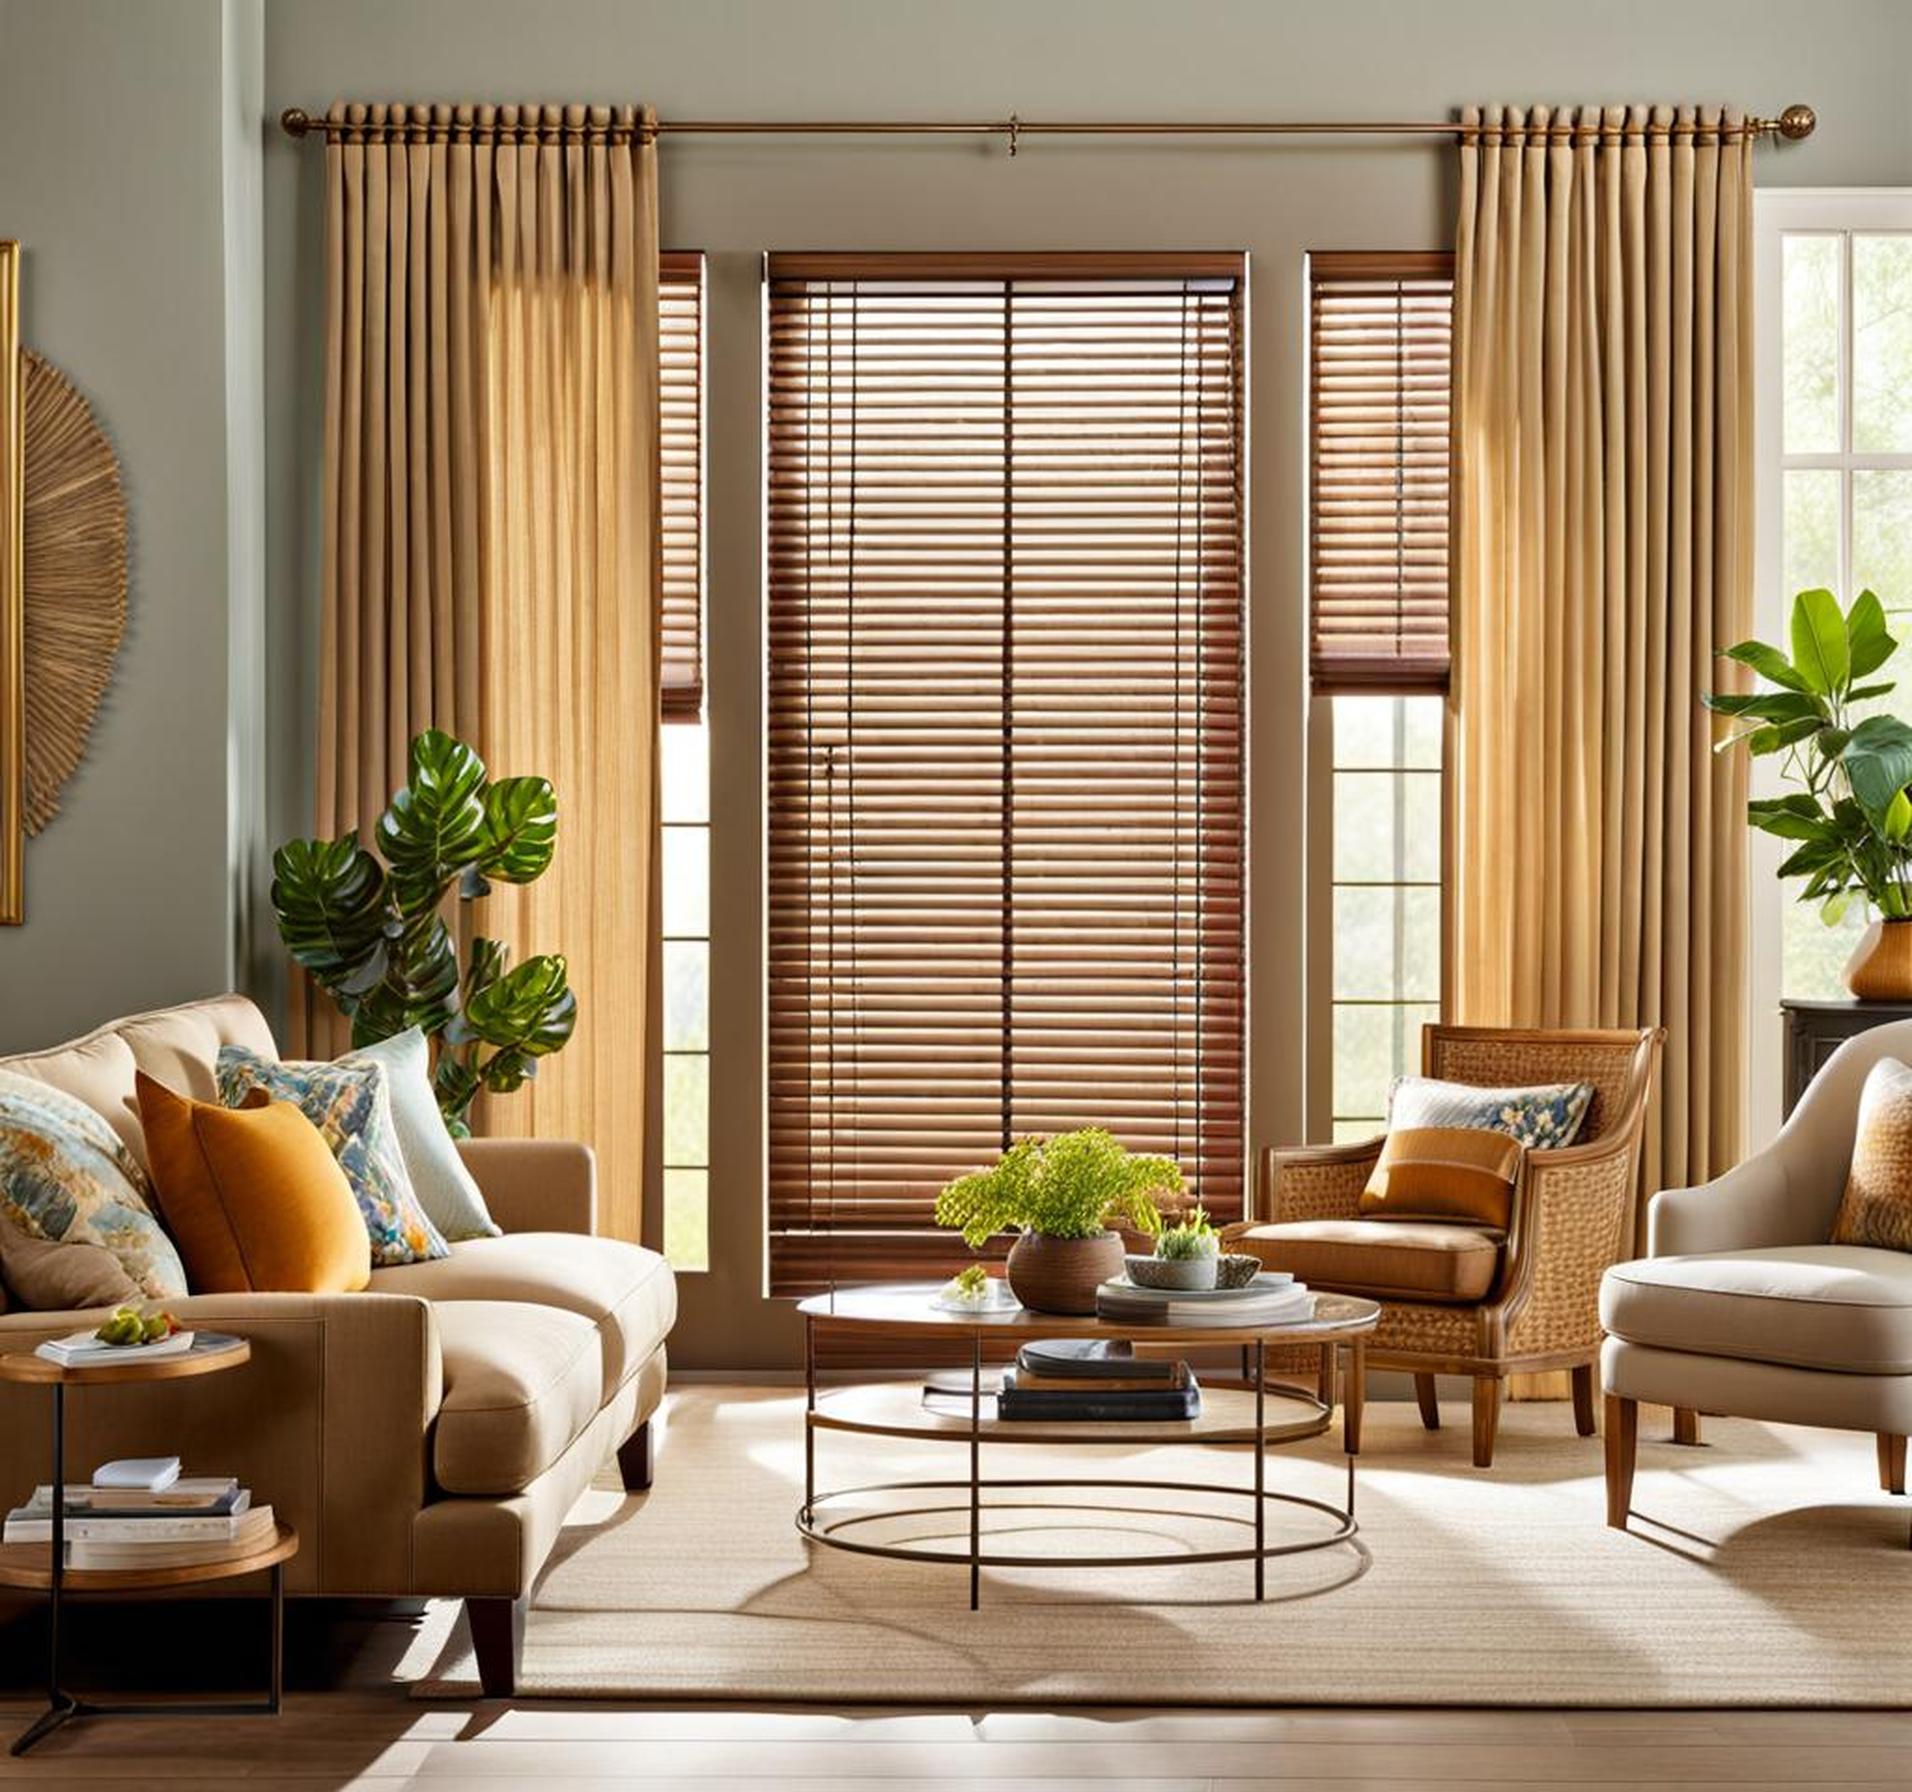 blinds or curtains for living room